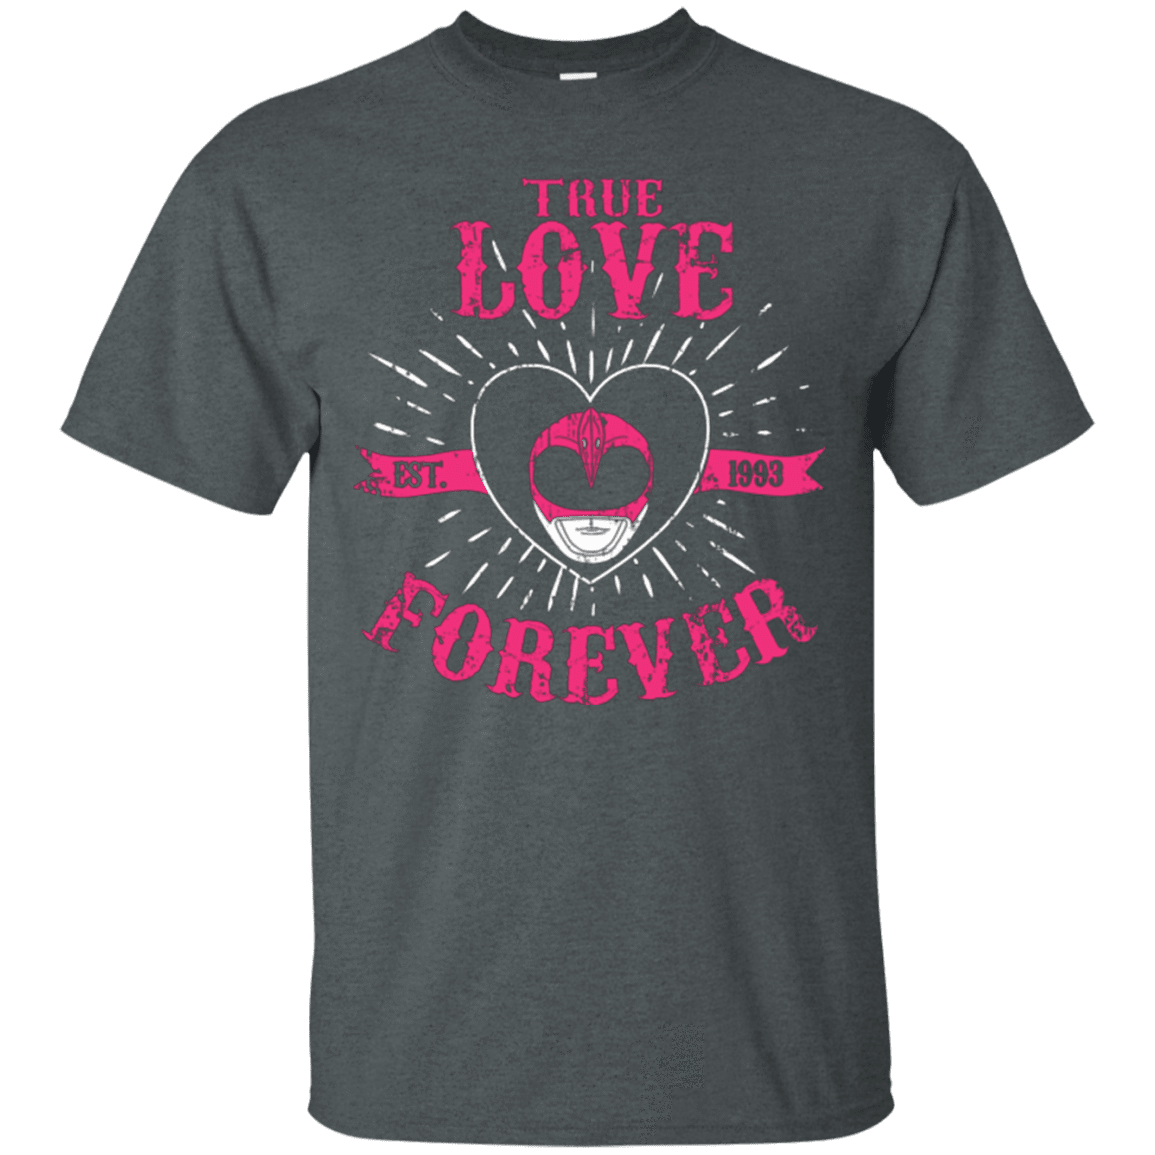 T-Shirts Dark Heather / Small True Love Forever Pink T-Shirt